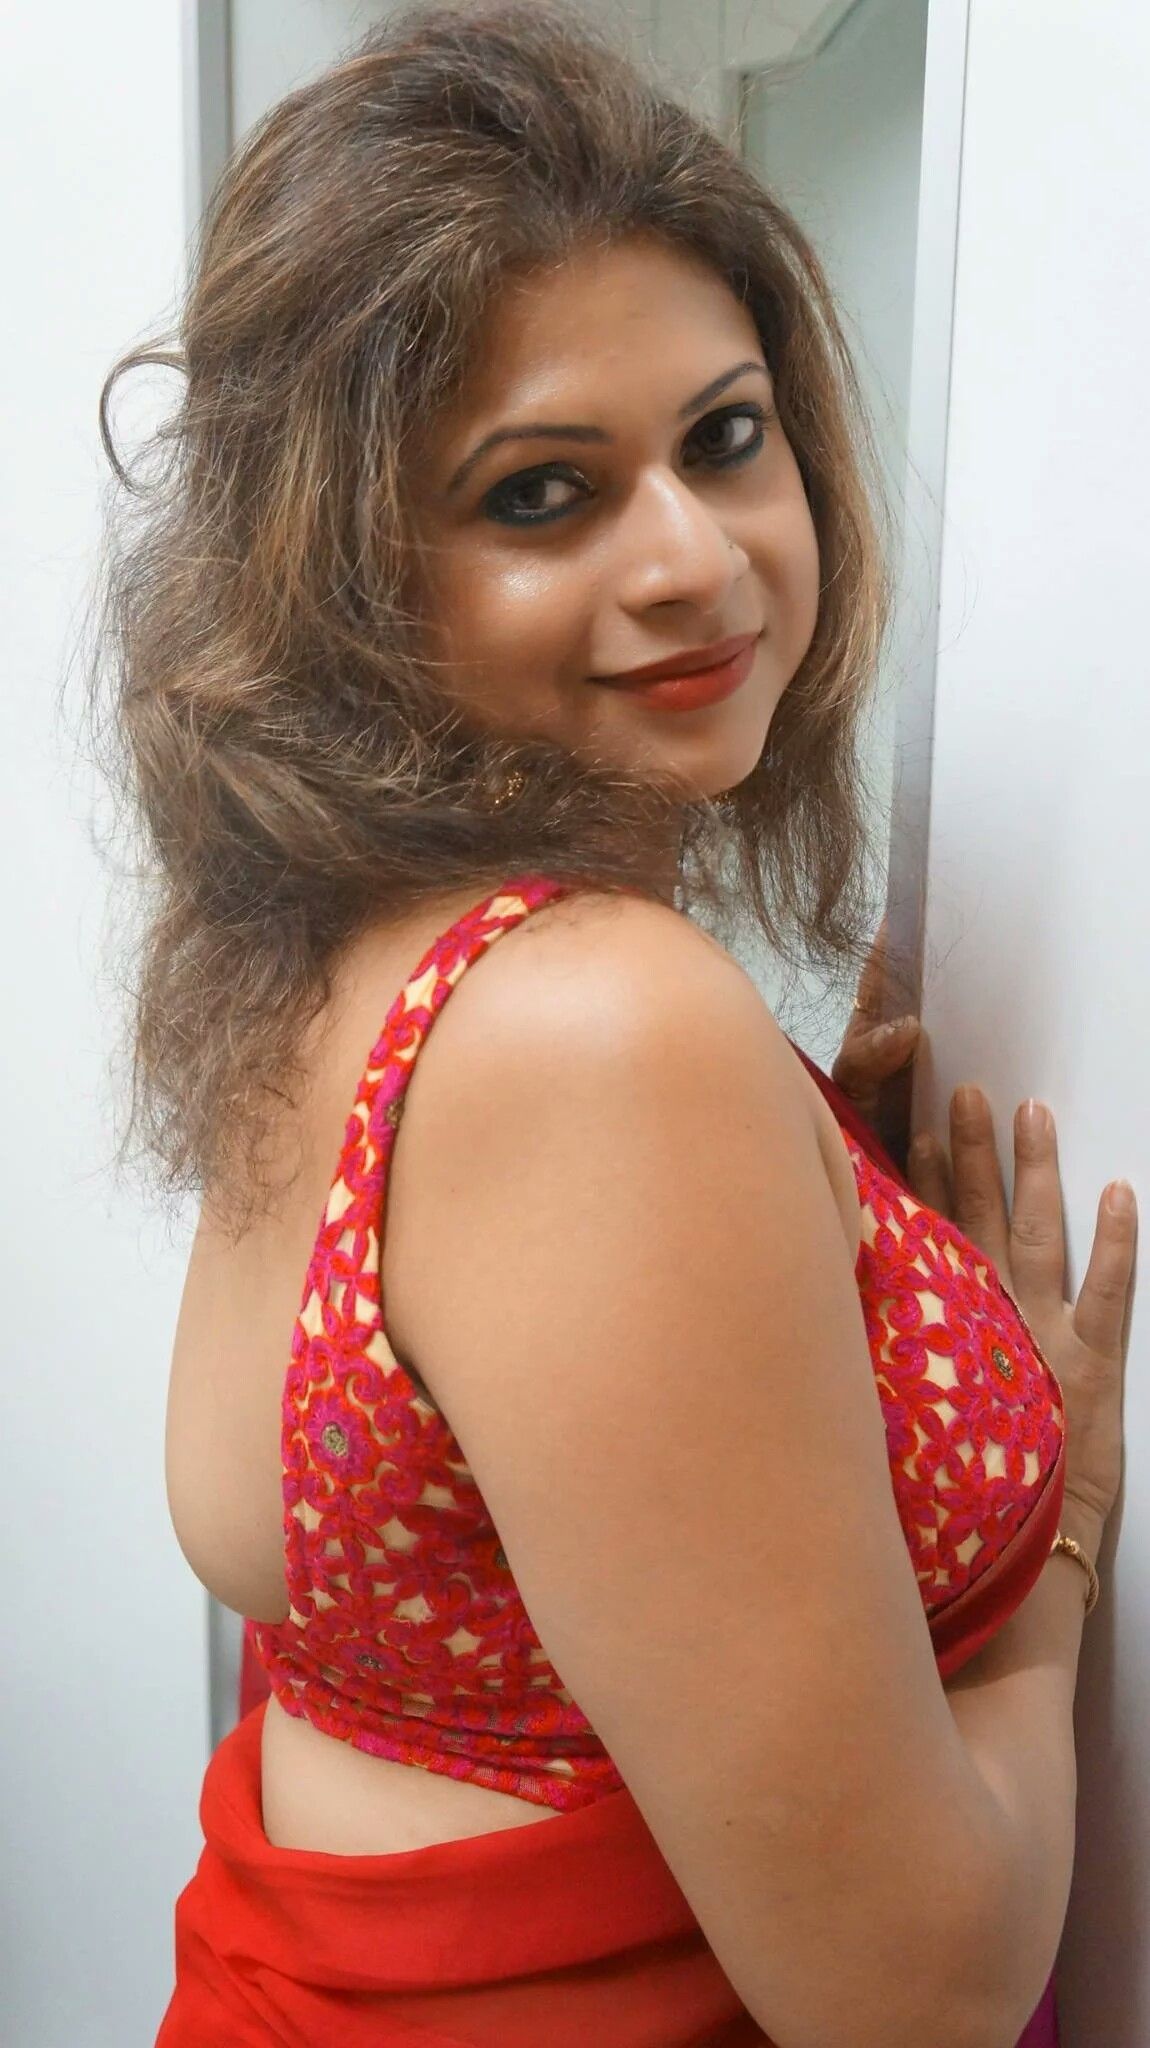 Call girl in Aerocity - Real meet not available online paid fun only by sumita bhabhi